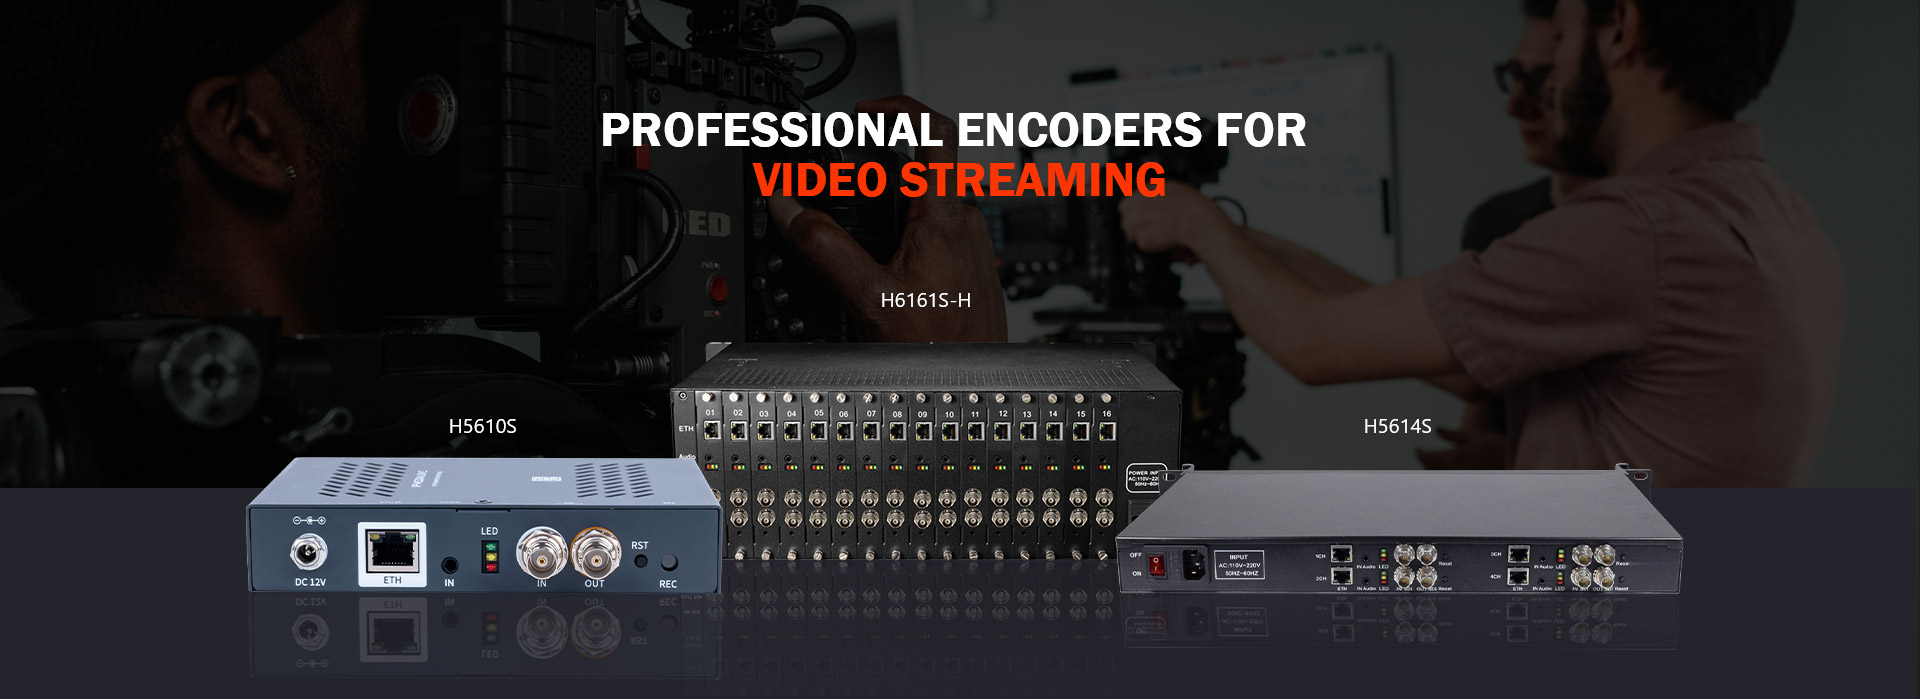 Professional encoders for video streaming